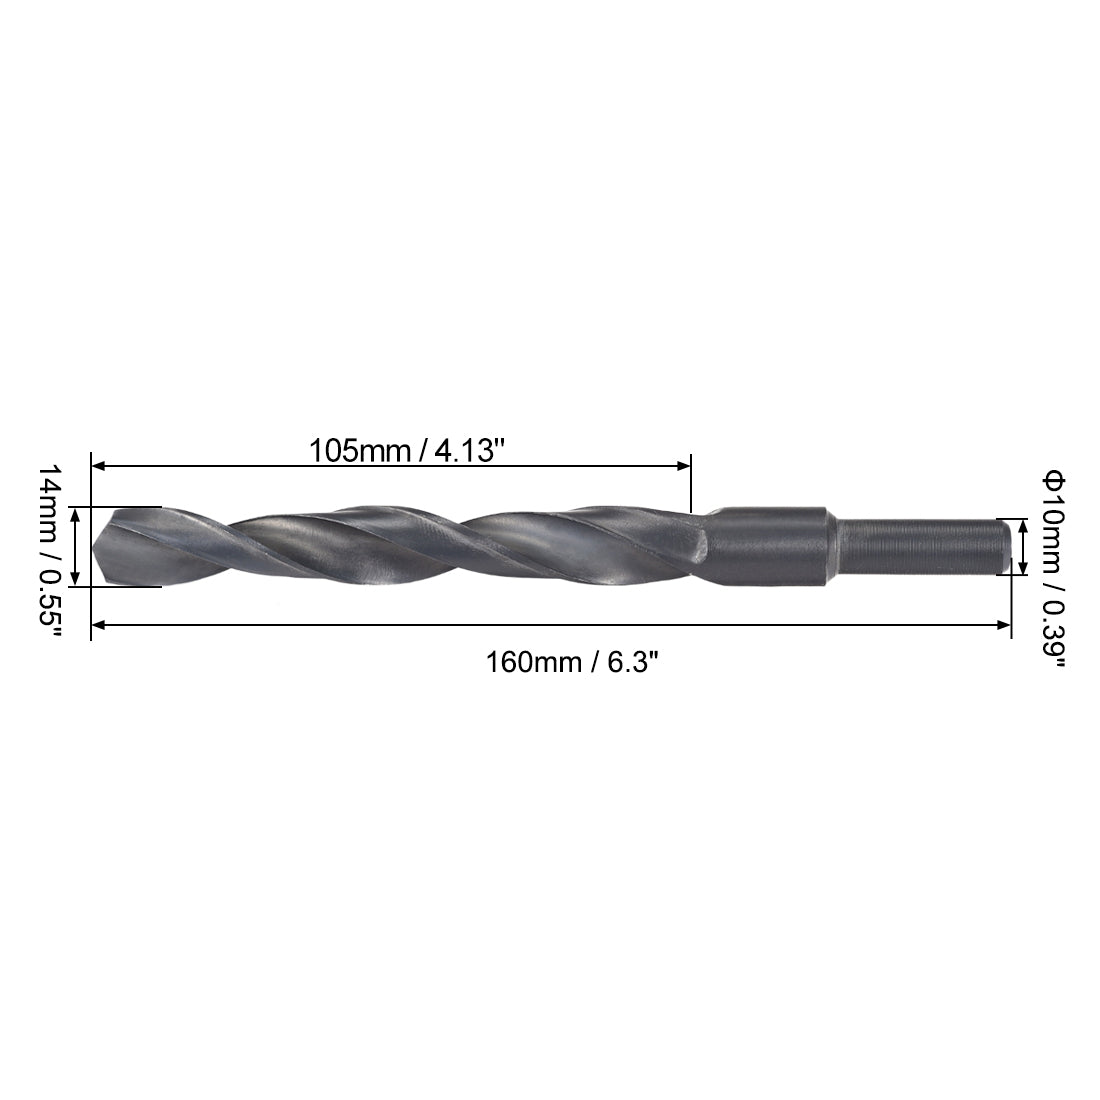 Uxcell Uxcell Reduced Shank Twist Drill Bits 14mm HSS 4241 with 10mm Shank 1 Pcs